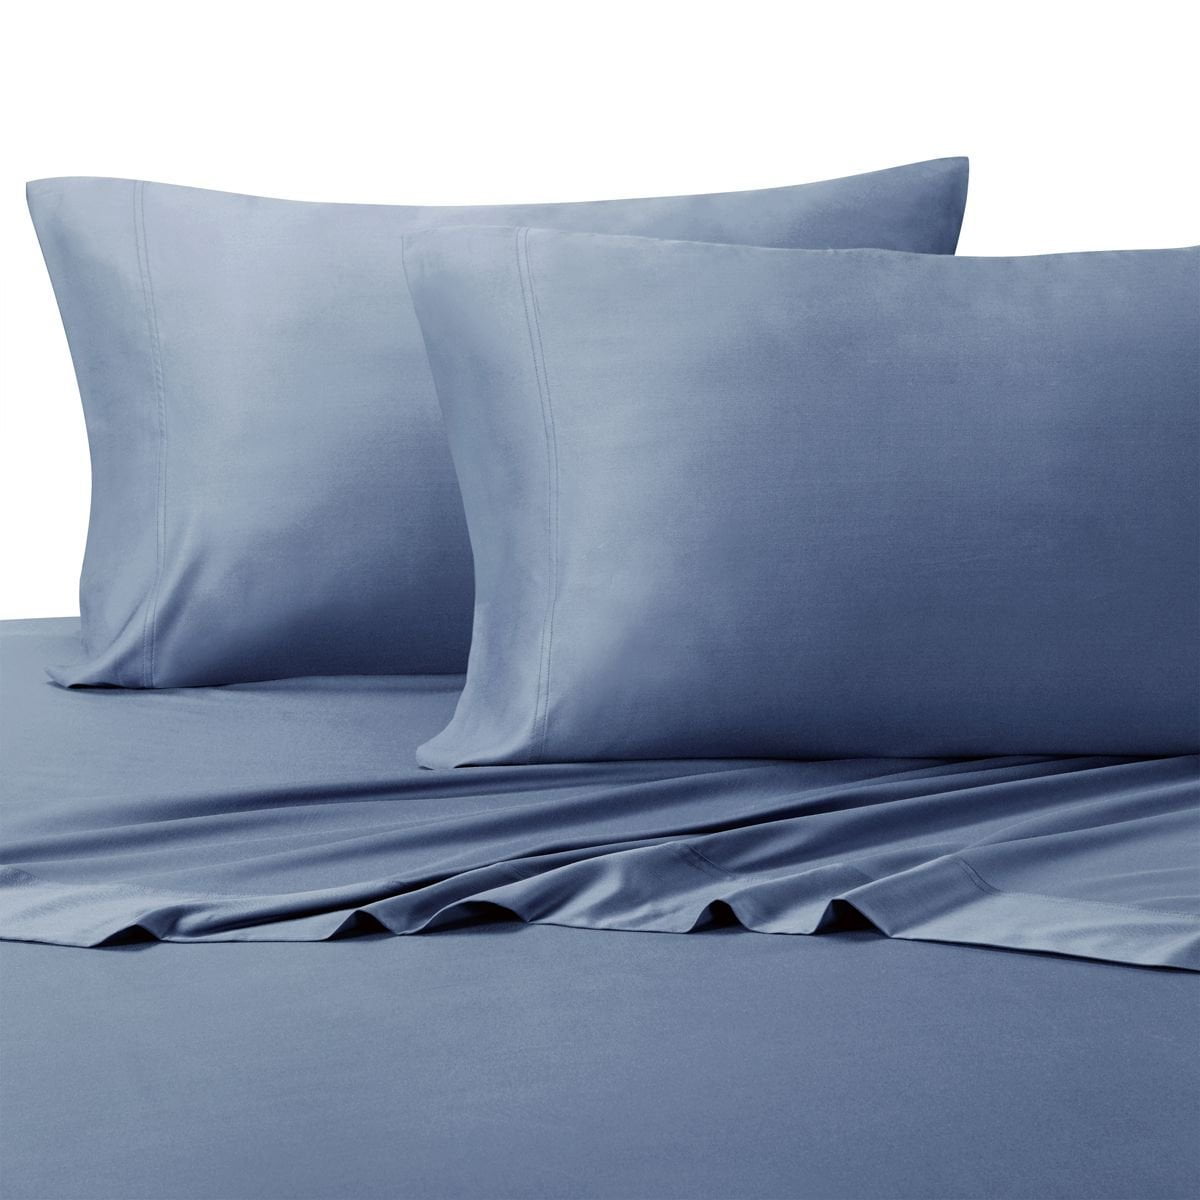 Standard Pillowcases Pair Super Silky Soft & Cool 100% Viscose from Bamboo Solid 